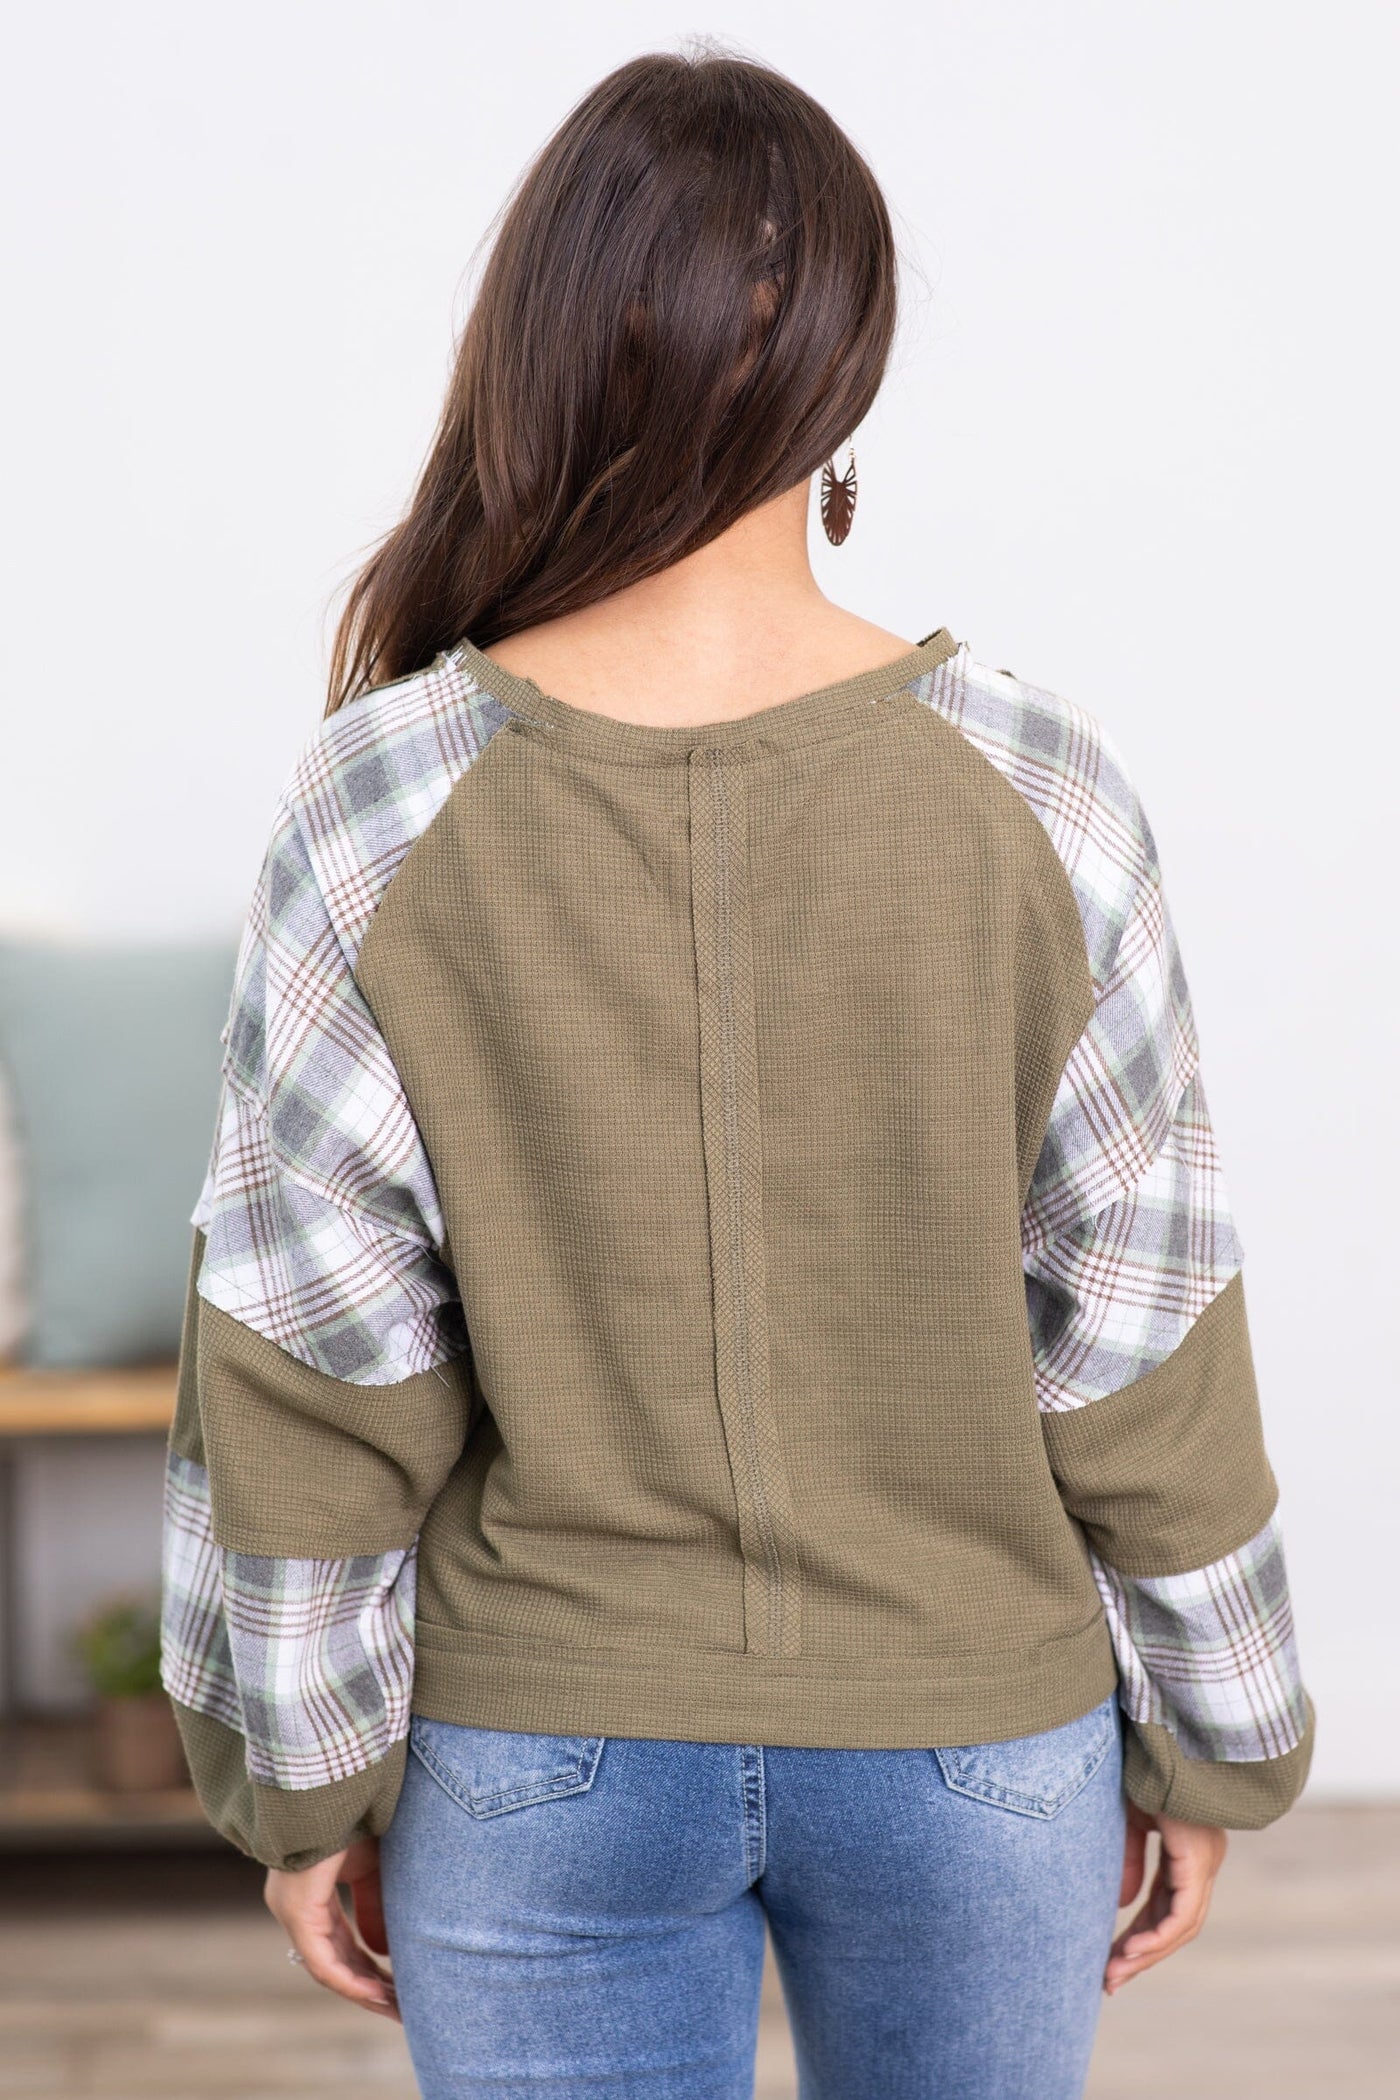 Olive Top With Plaid Sleeve Detail - Filly Flair